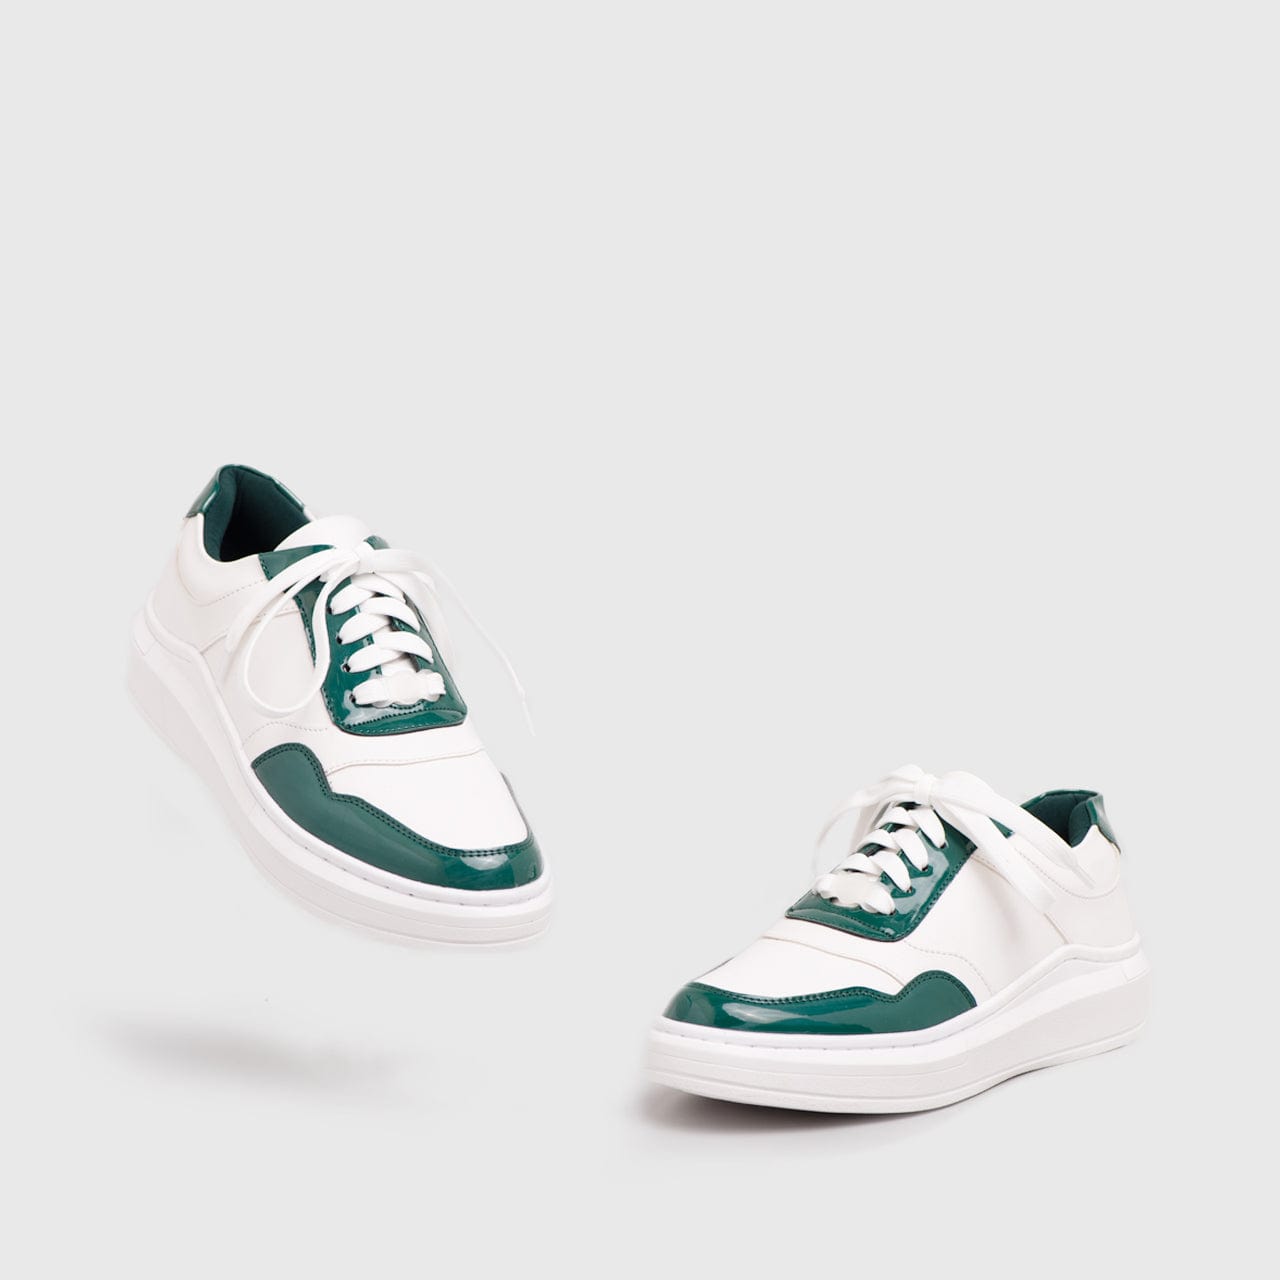 Adorable Projects Official Adorableprojects - Saldana Sneakers White Green - Sneakers Putih